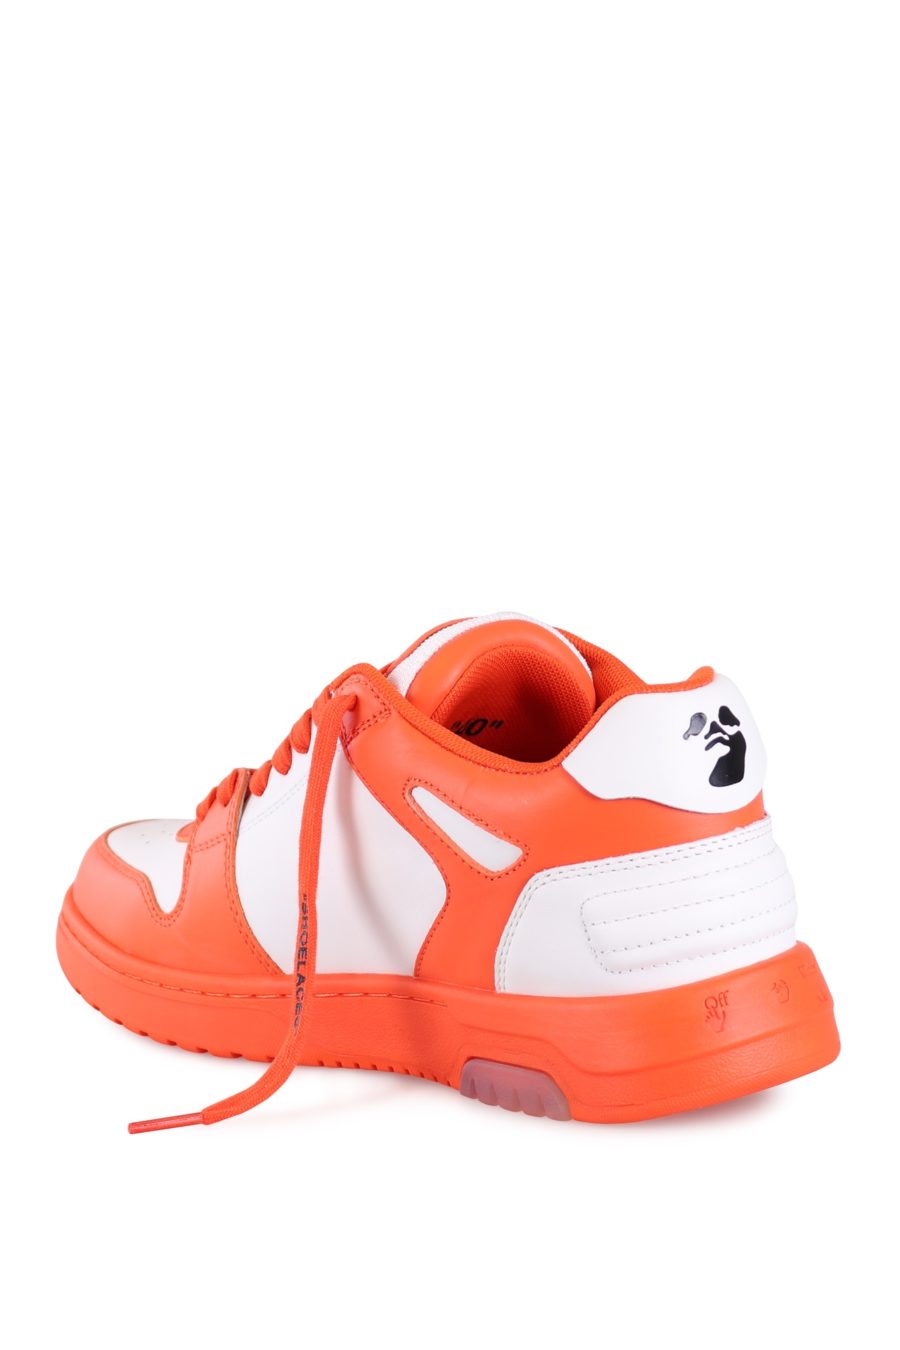 Turnschuhe Off-White "out of office" weiß mit orange - 09658c0be10c673e44c72b1b0855d8298251e02c